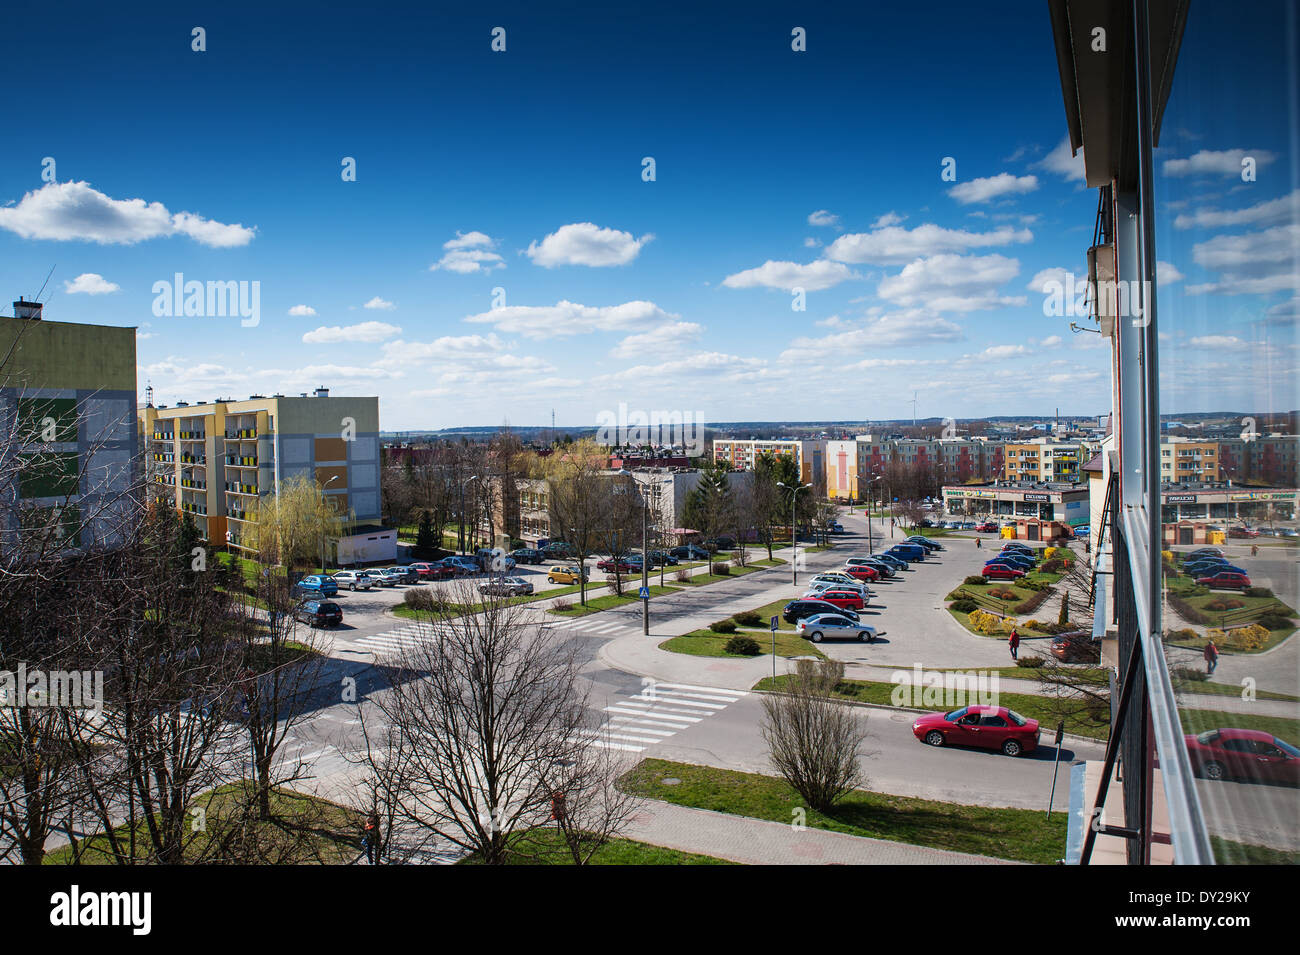 View of a residential complex in Poland Stock Photo